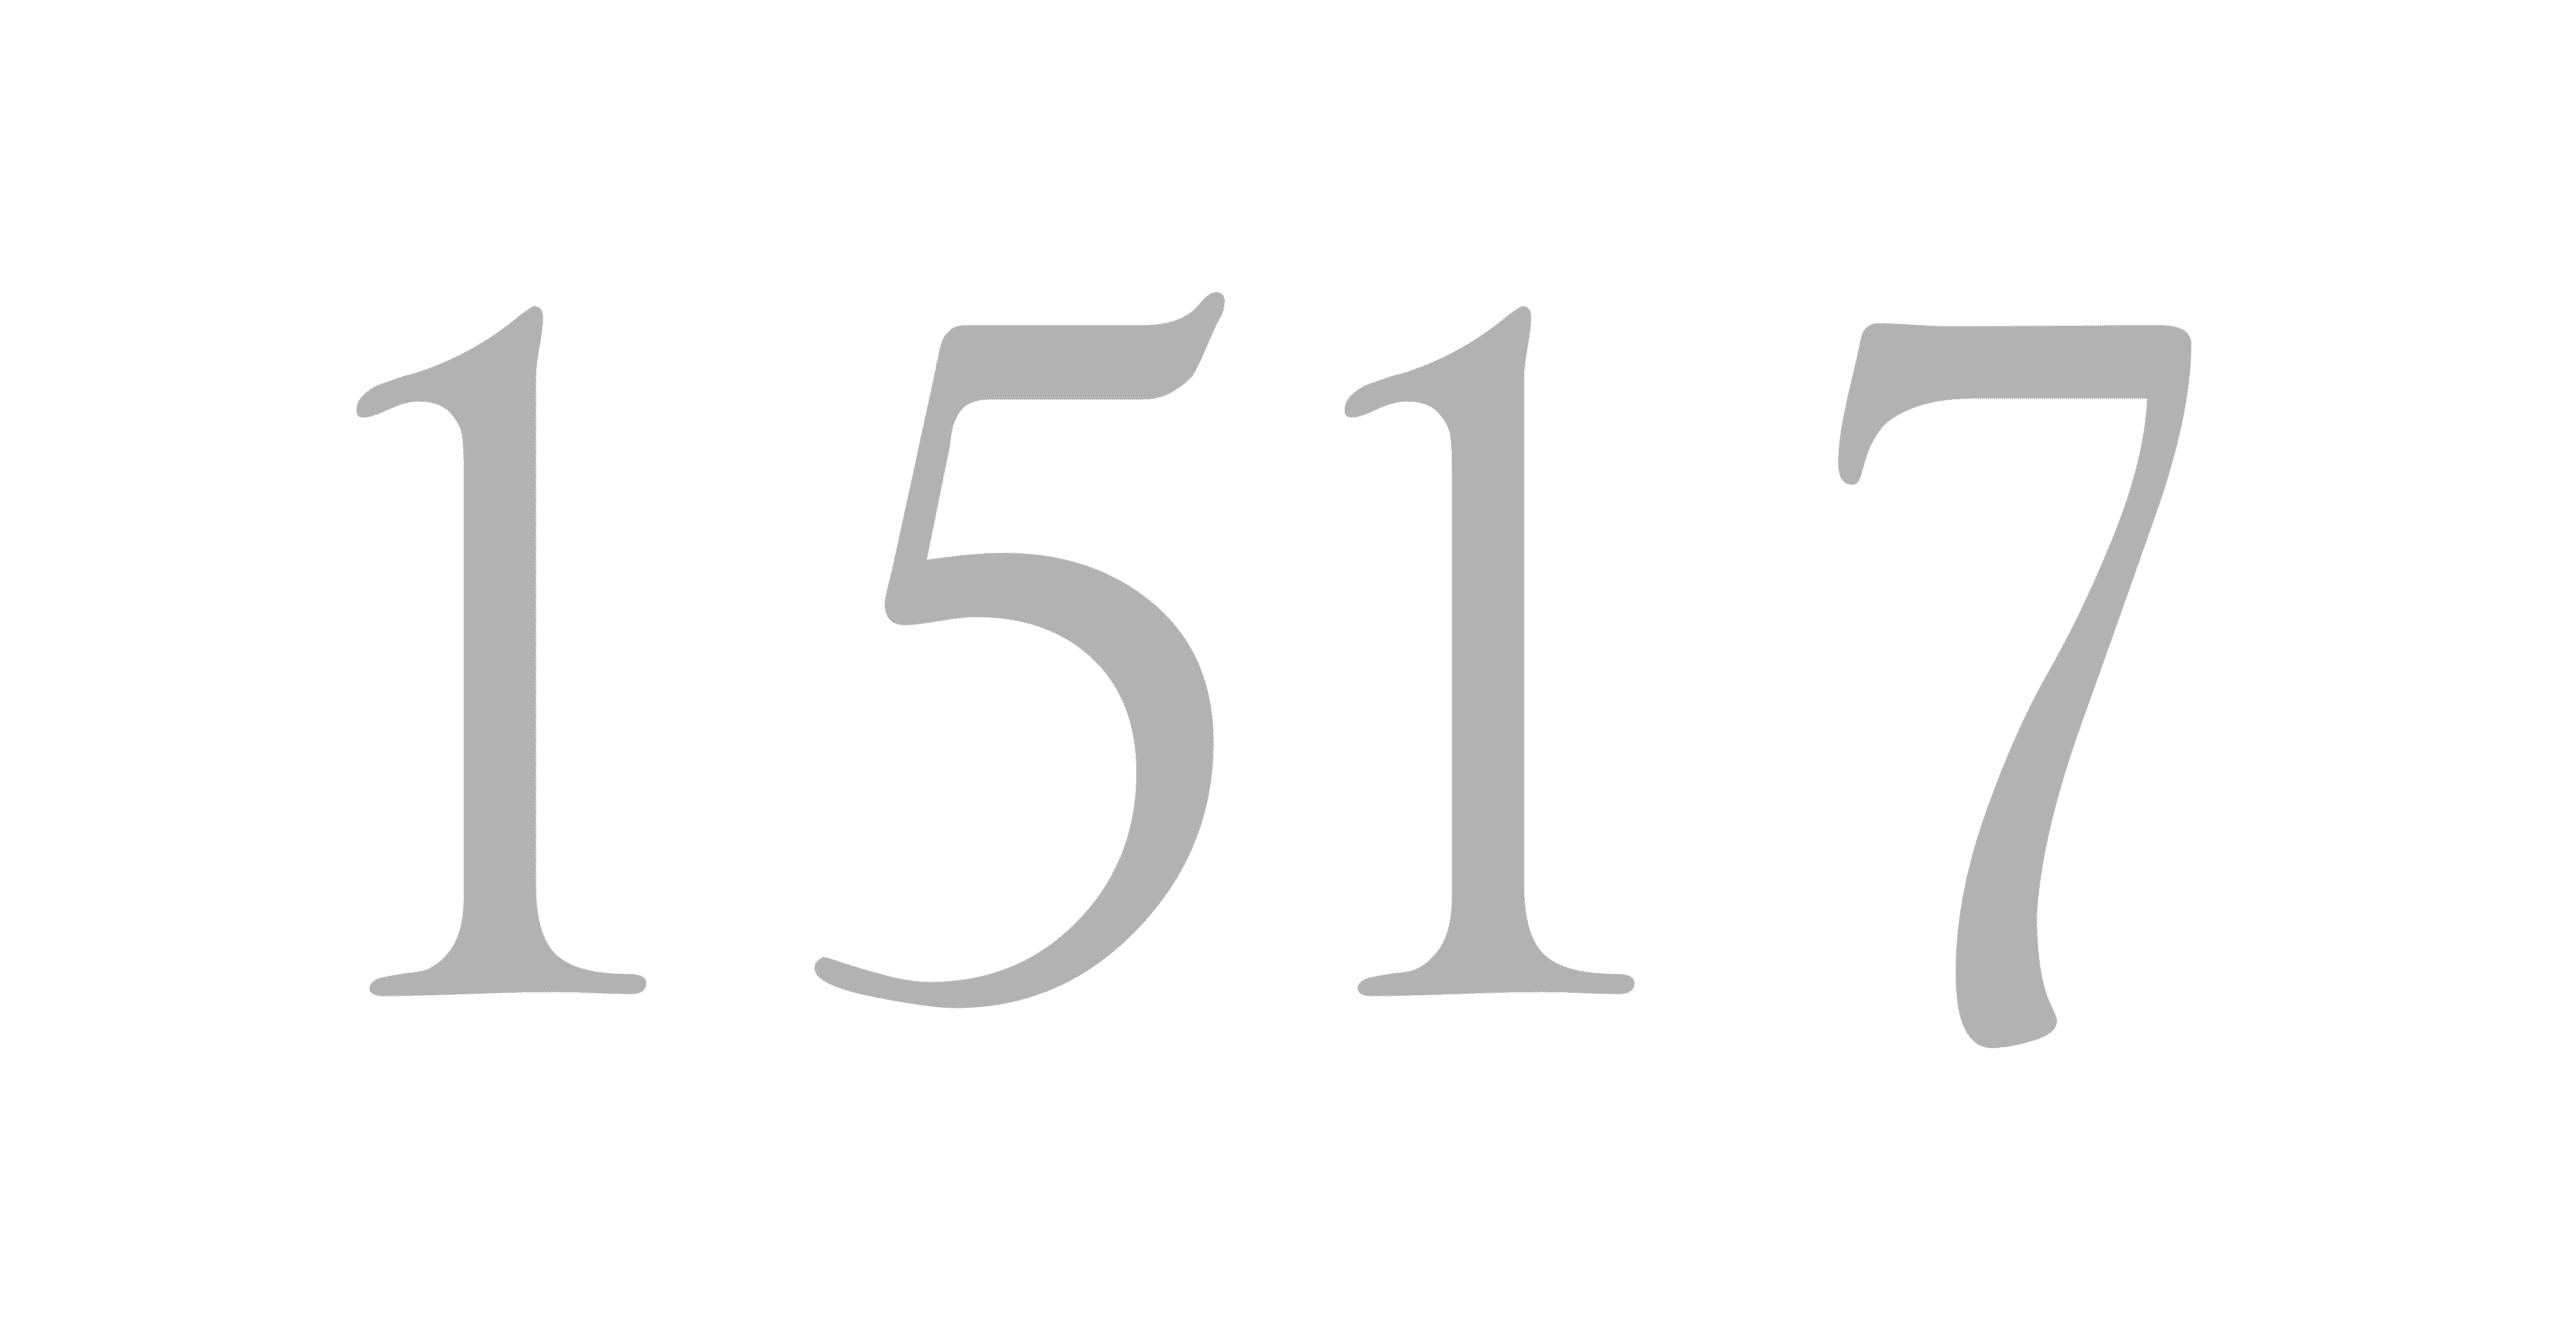 The digits "1517" are displayed in a light gray serif font on a white background, reminiscent of polished corporate photography.